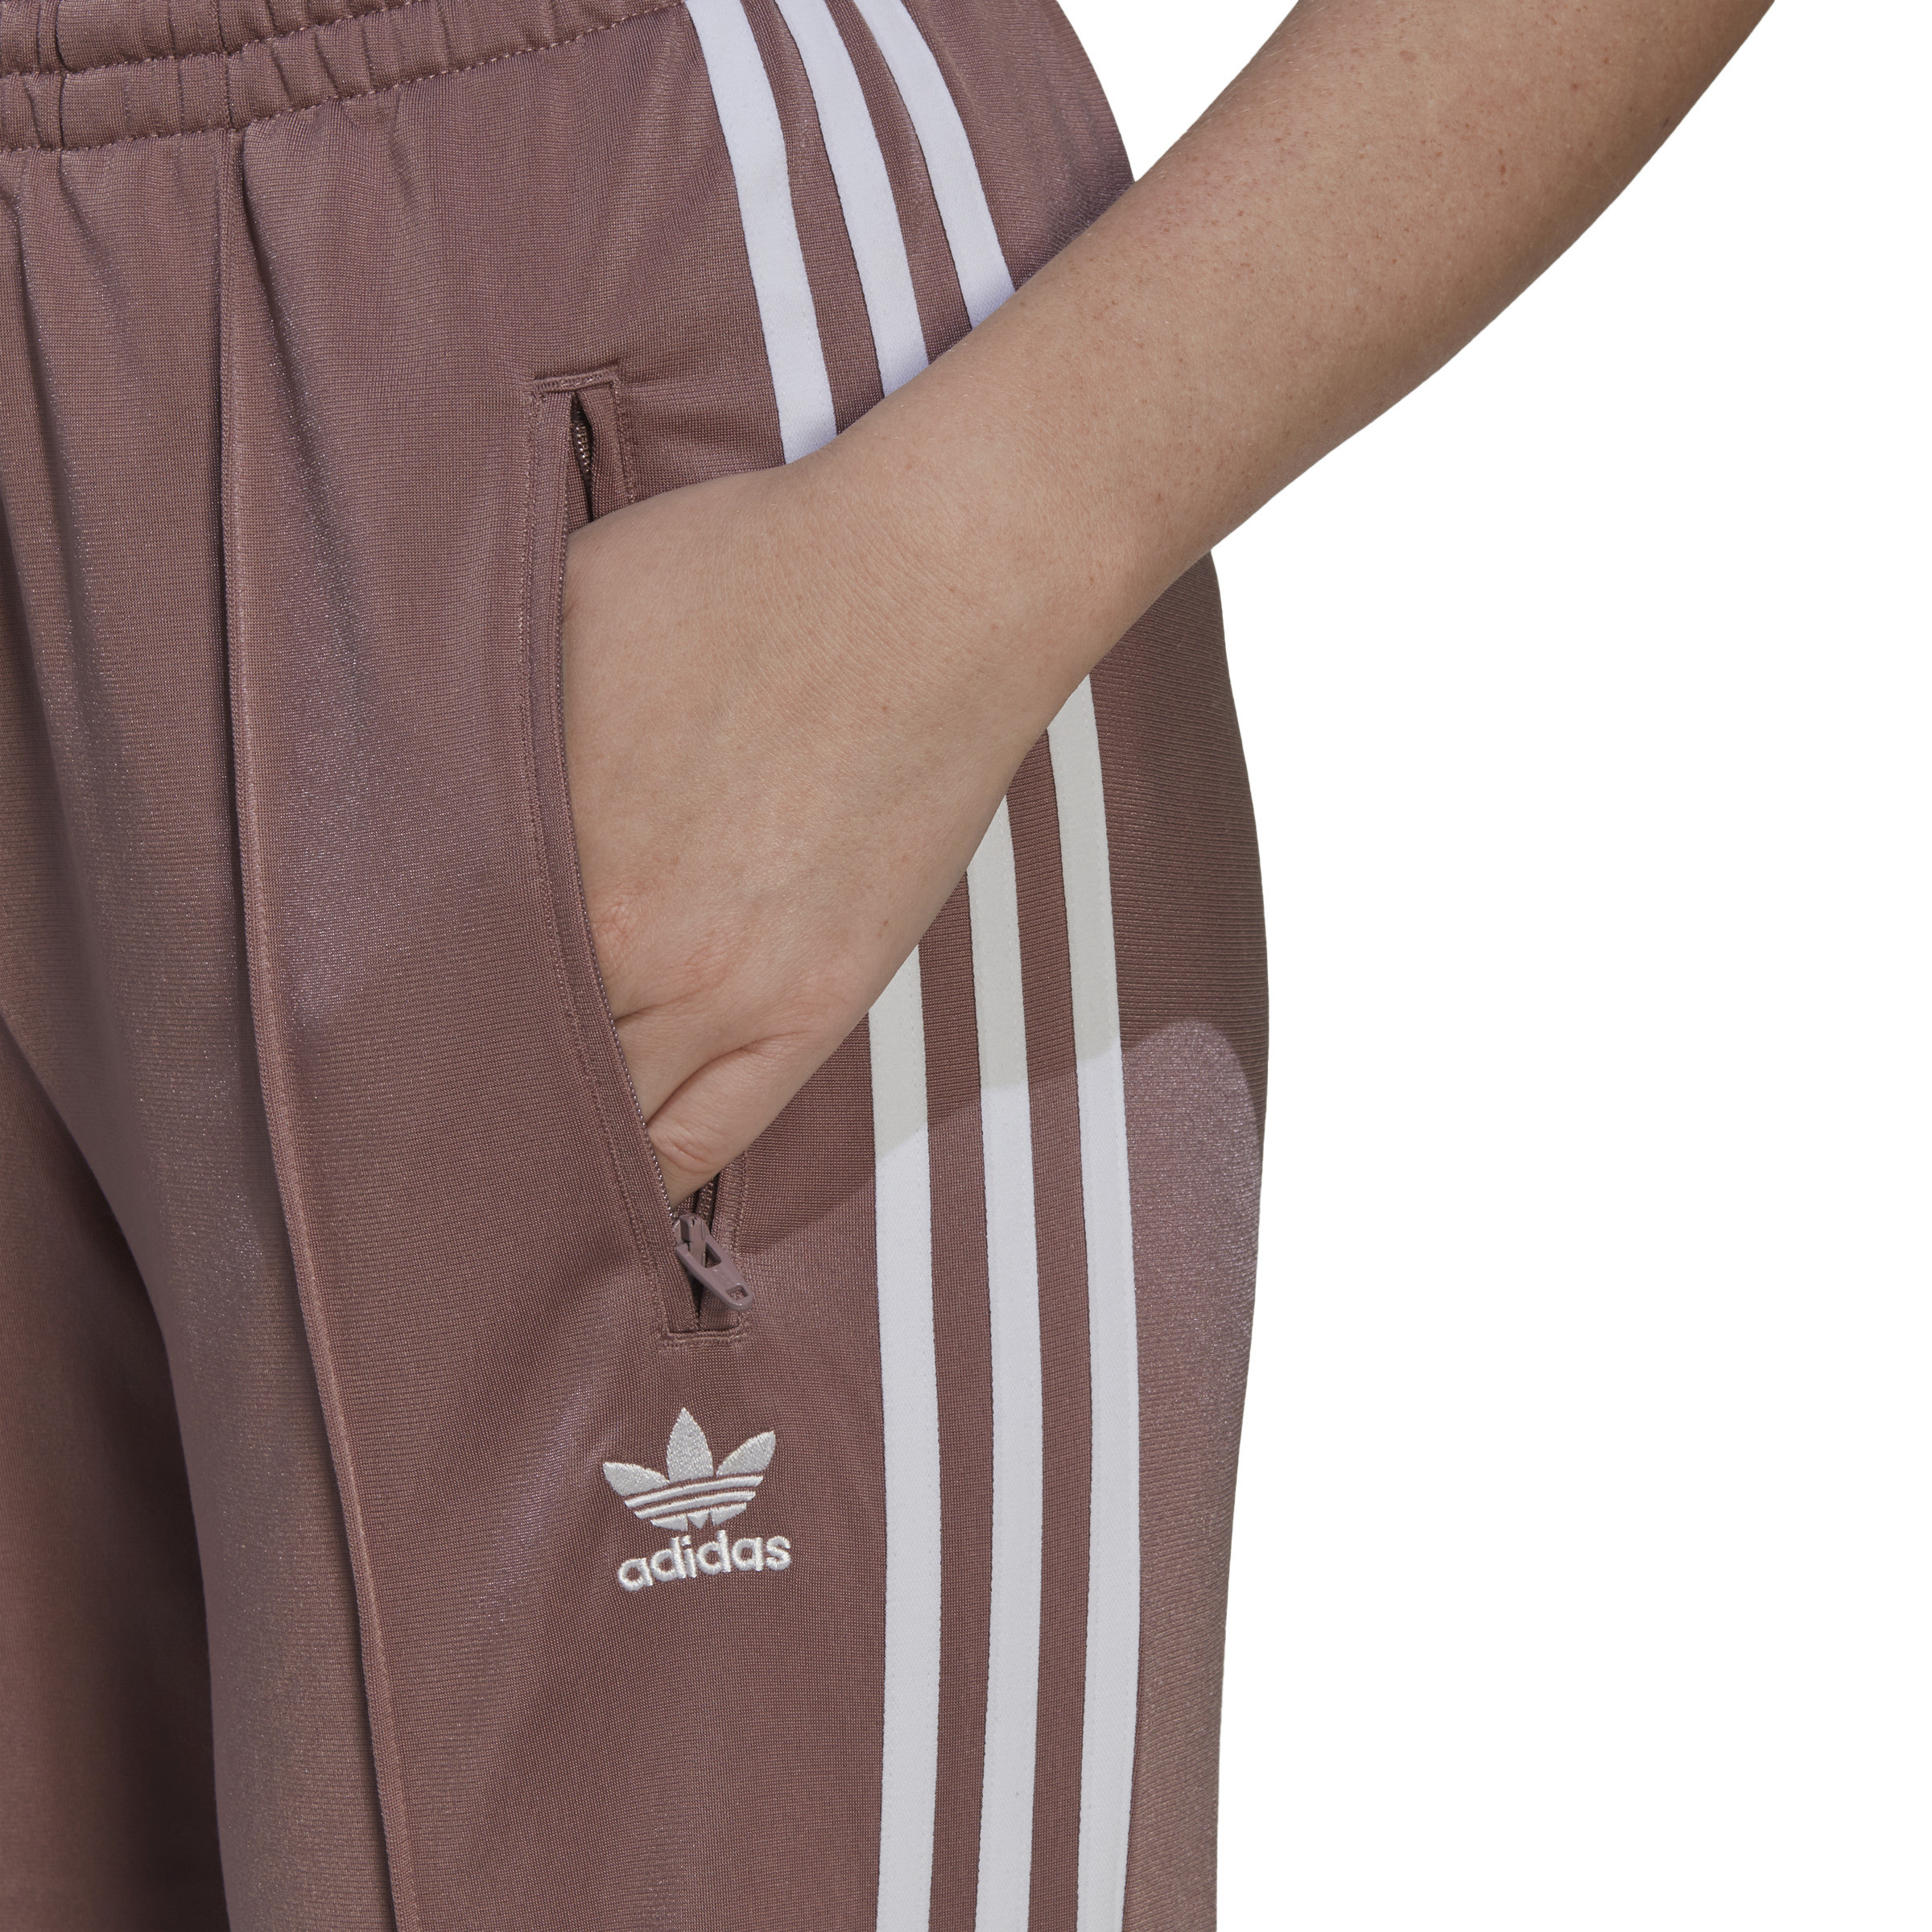 Adidas - Adicolor sports trousers, Antique Pink, large image number 2